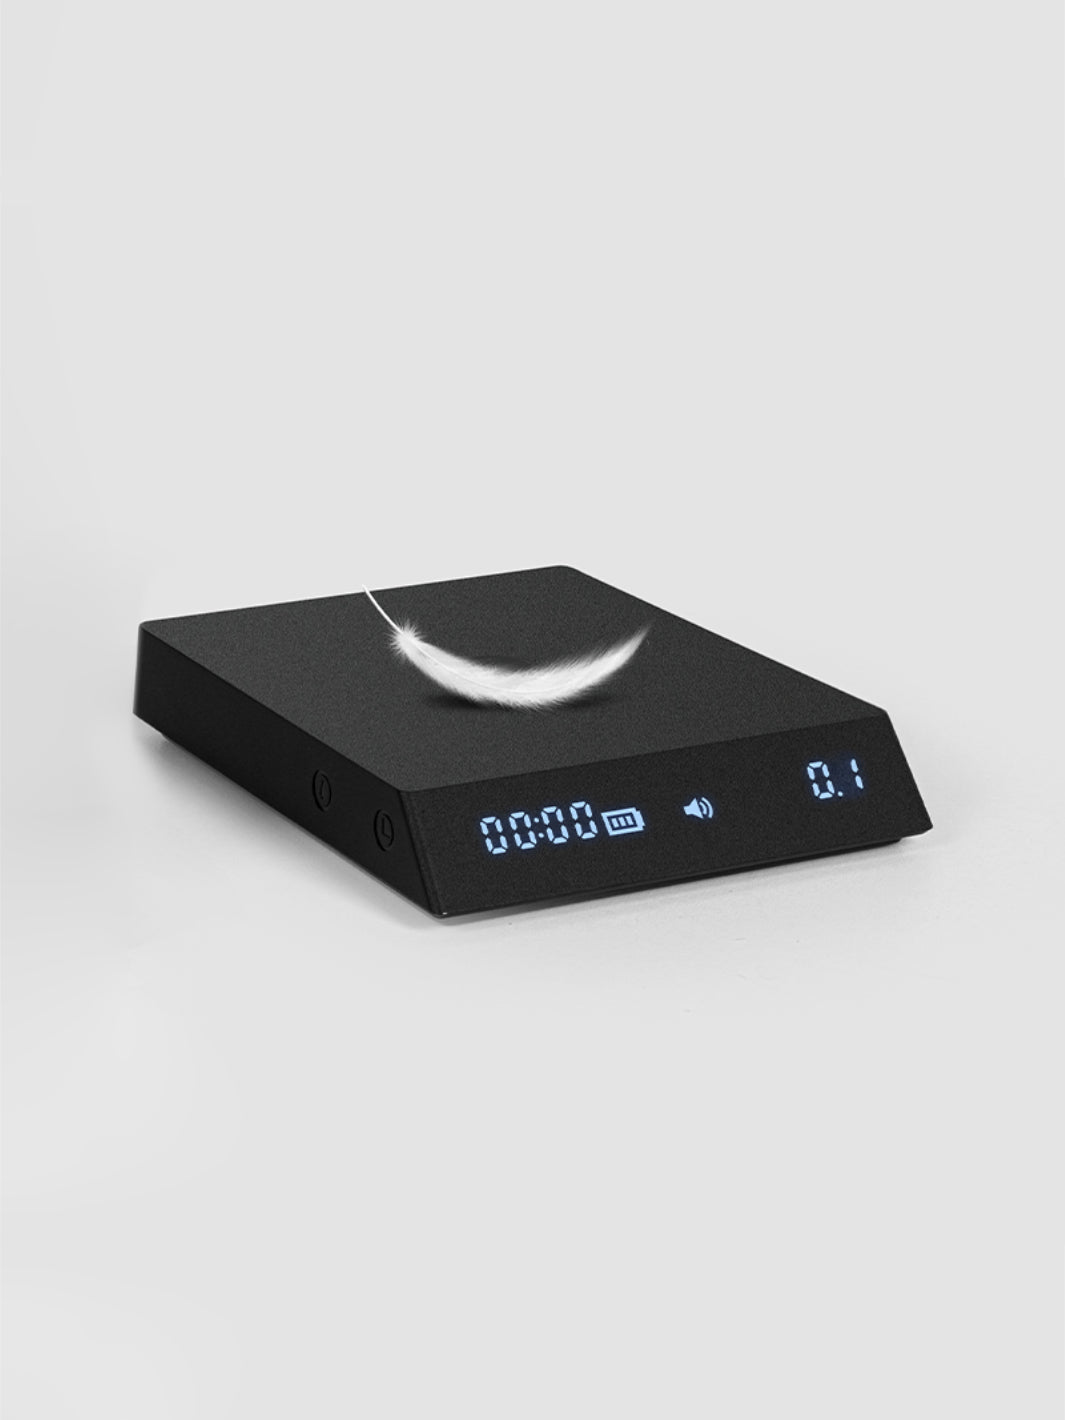 Digital Pocket Scale USB Rechargeable with Maldives